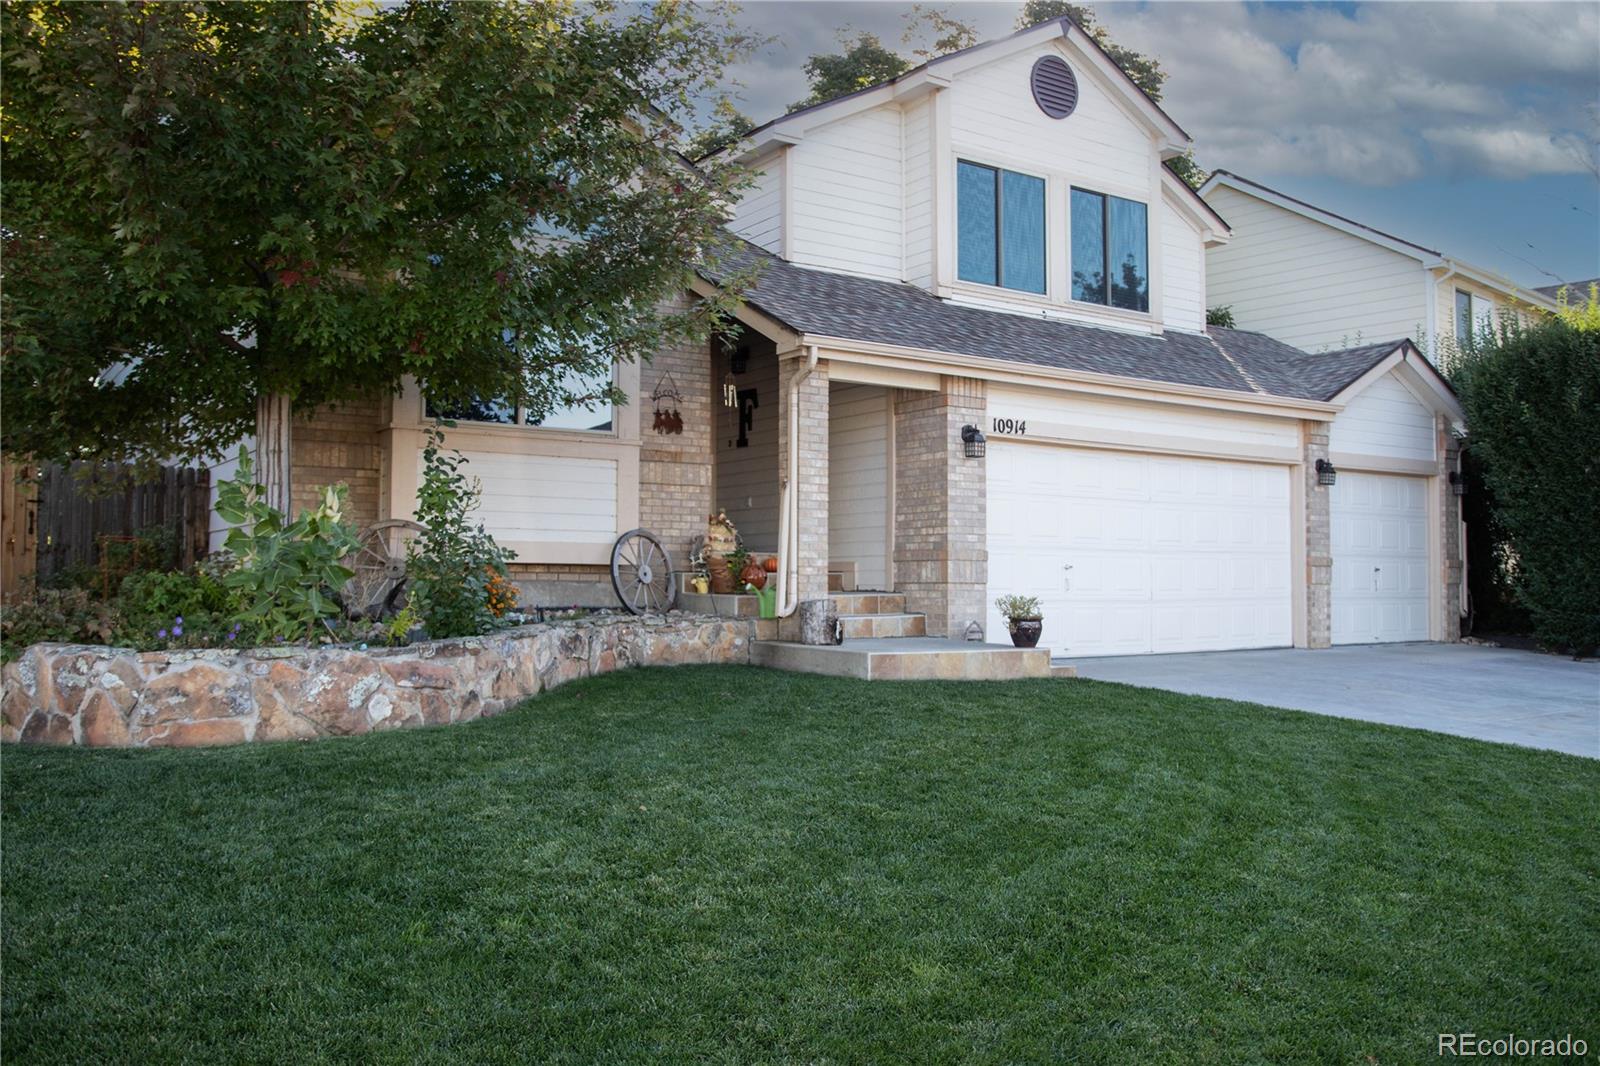 Report Image for 10914 W 85th Place,Arvada, Colorado